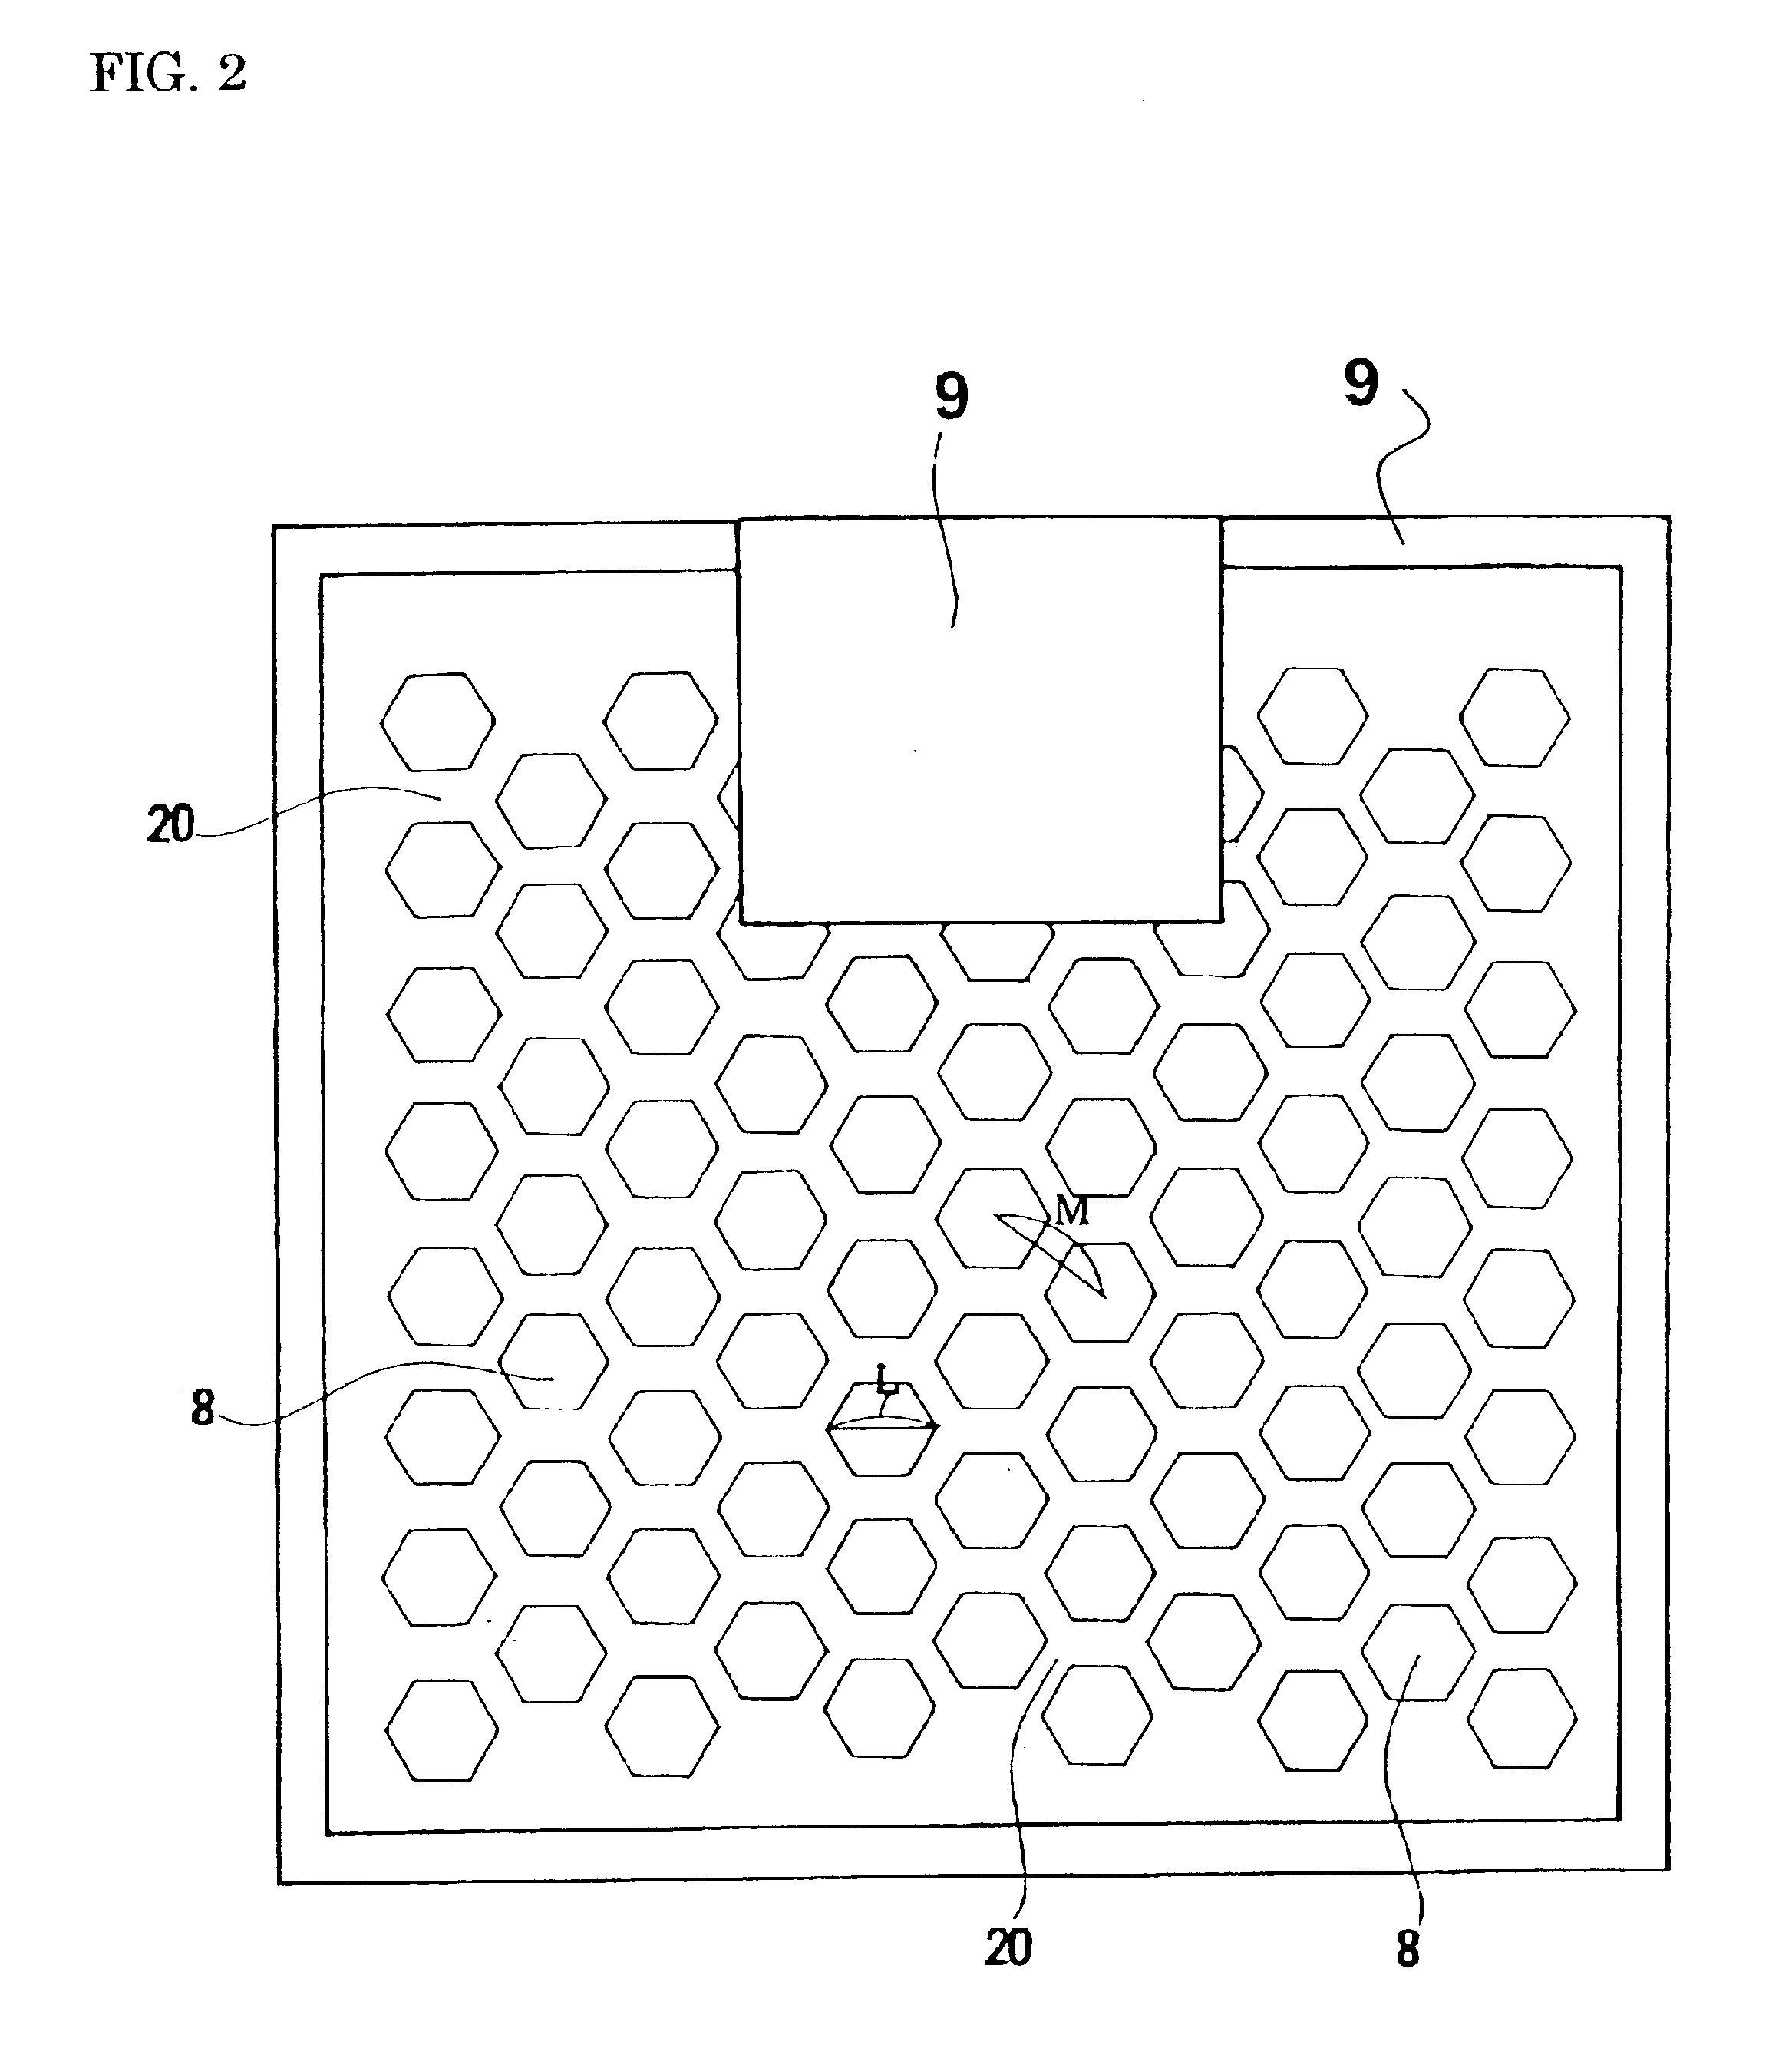 Structure of p-electrode at the light-emerging side of light-emitting diode